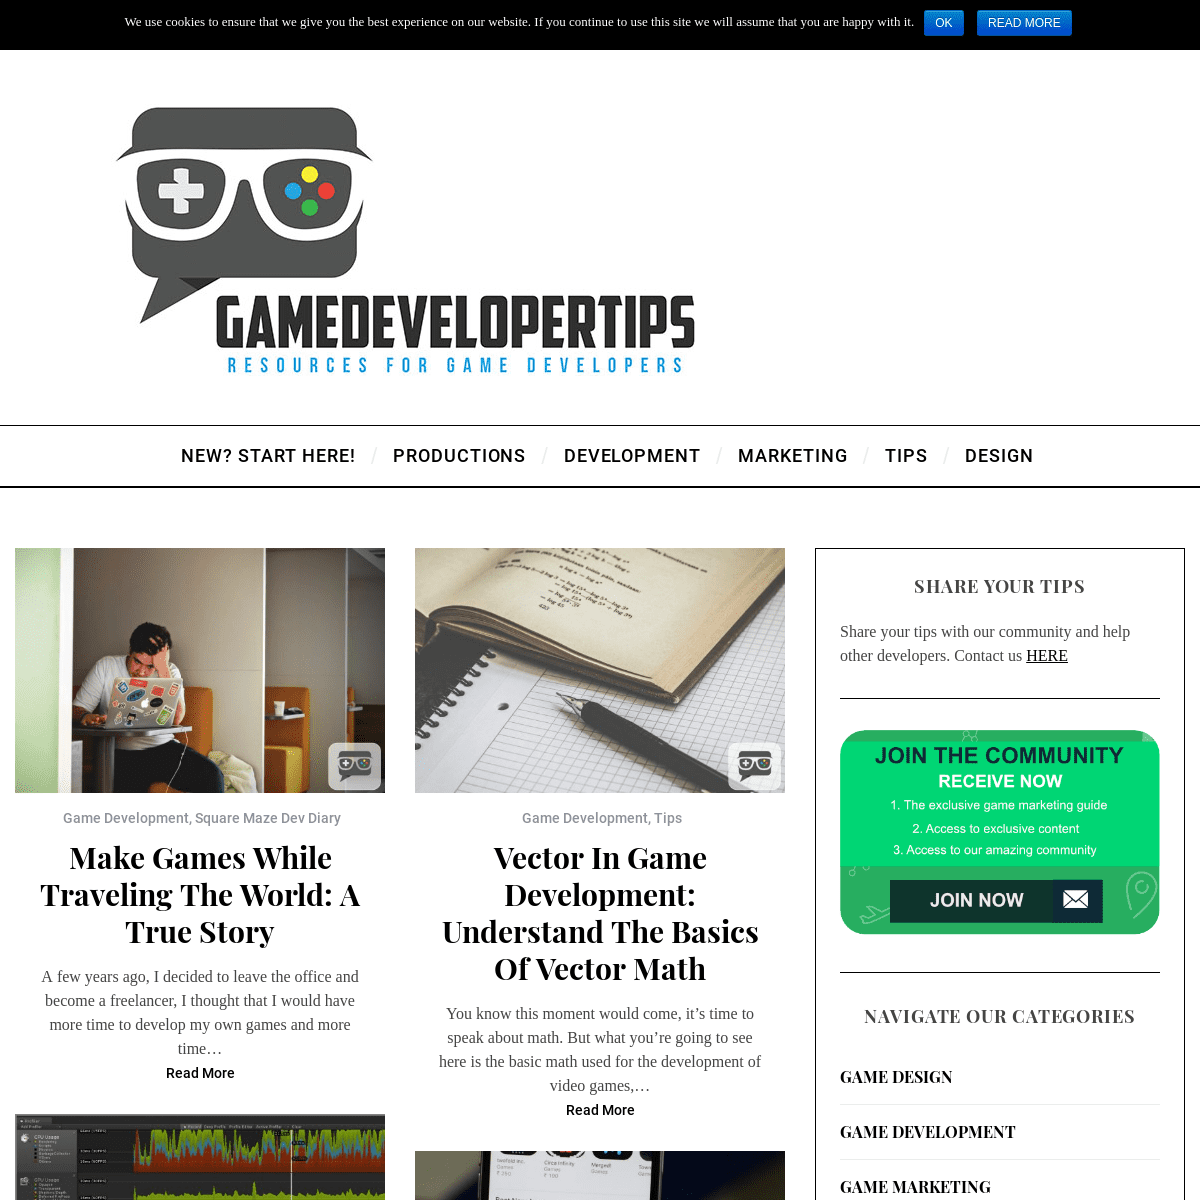 Gamedevelopertips - Free resources for game developers